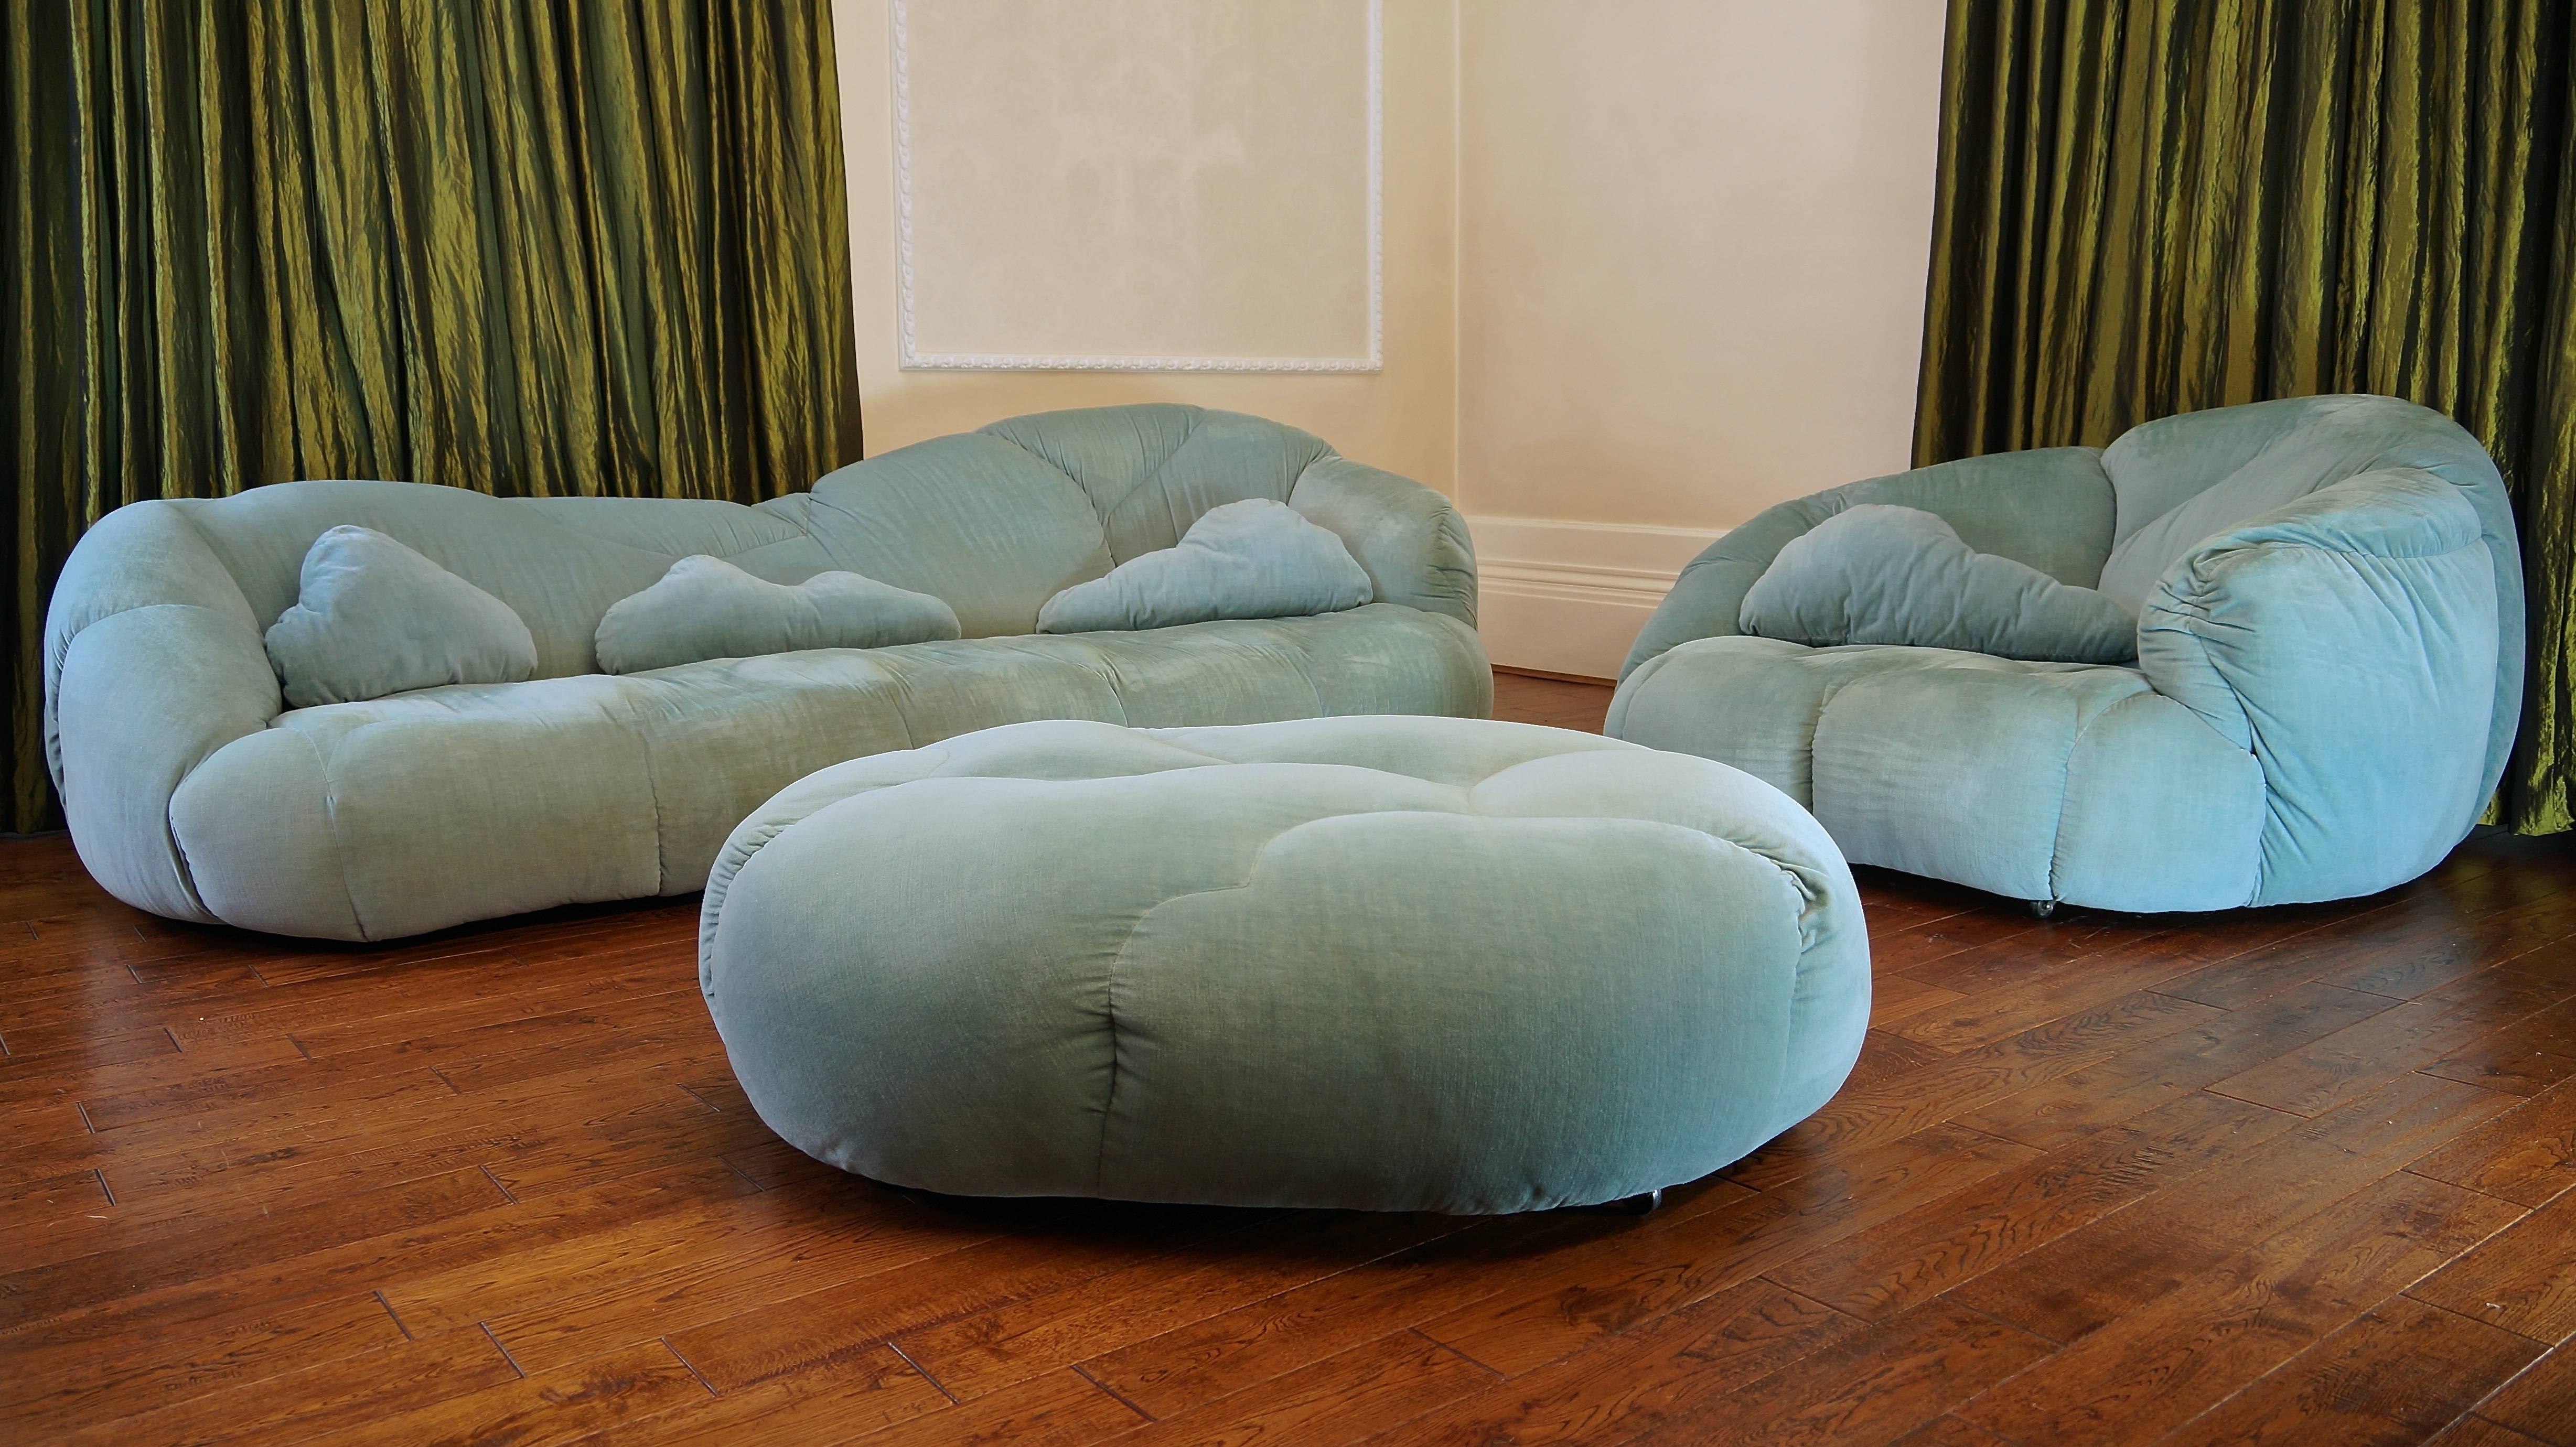 Incredibly rare cloud suite by HK Furniture comprising the stunning, large sofa/chaise longue and never seen before armchair and footstool/pouffe and to top it all off the very rare, full compliment of cloud cushions!!!

Designed by Howard Keith,